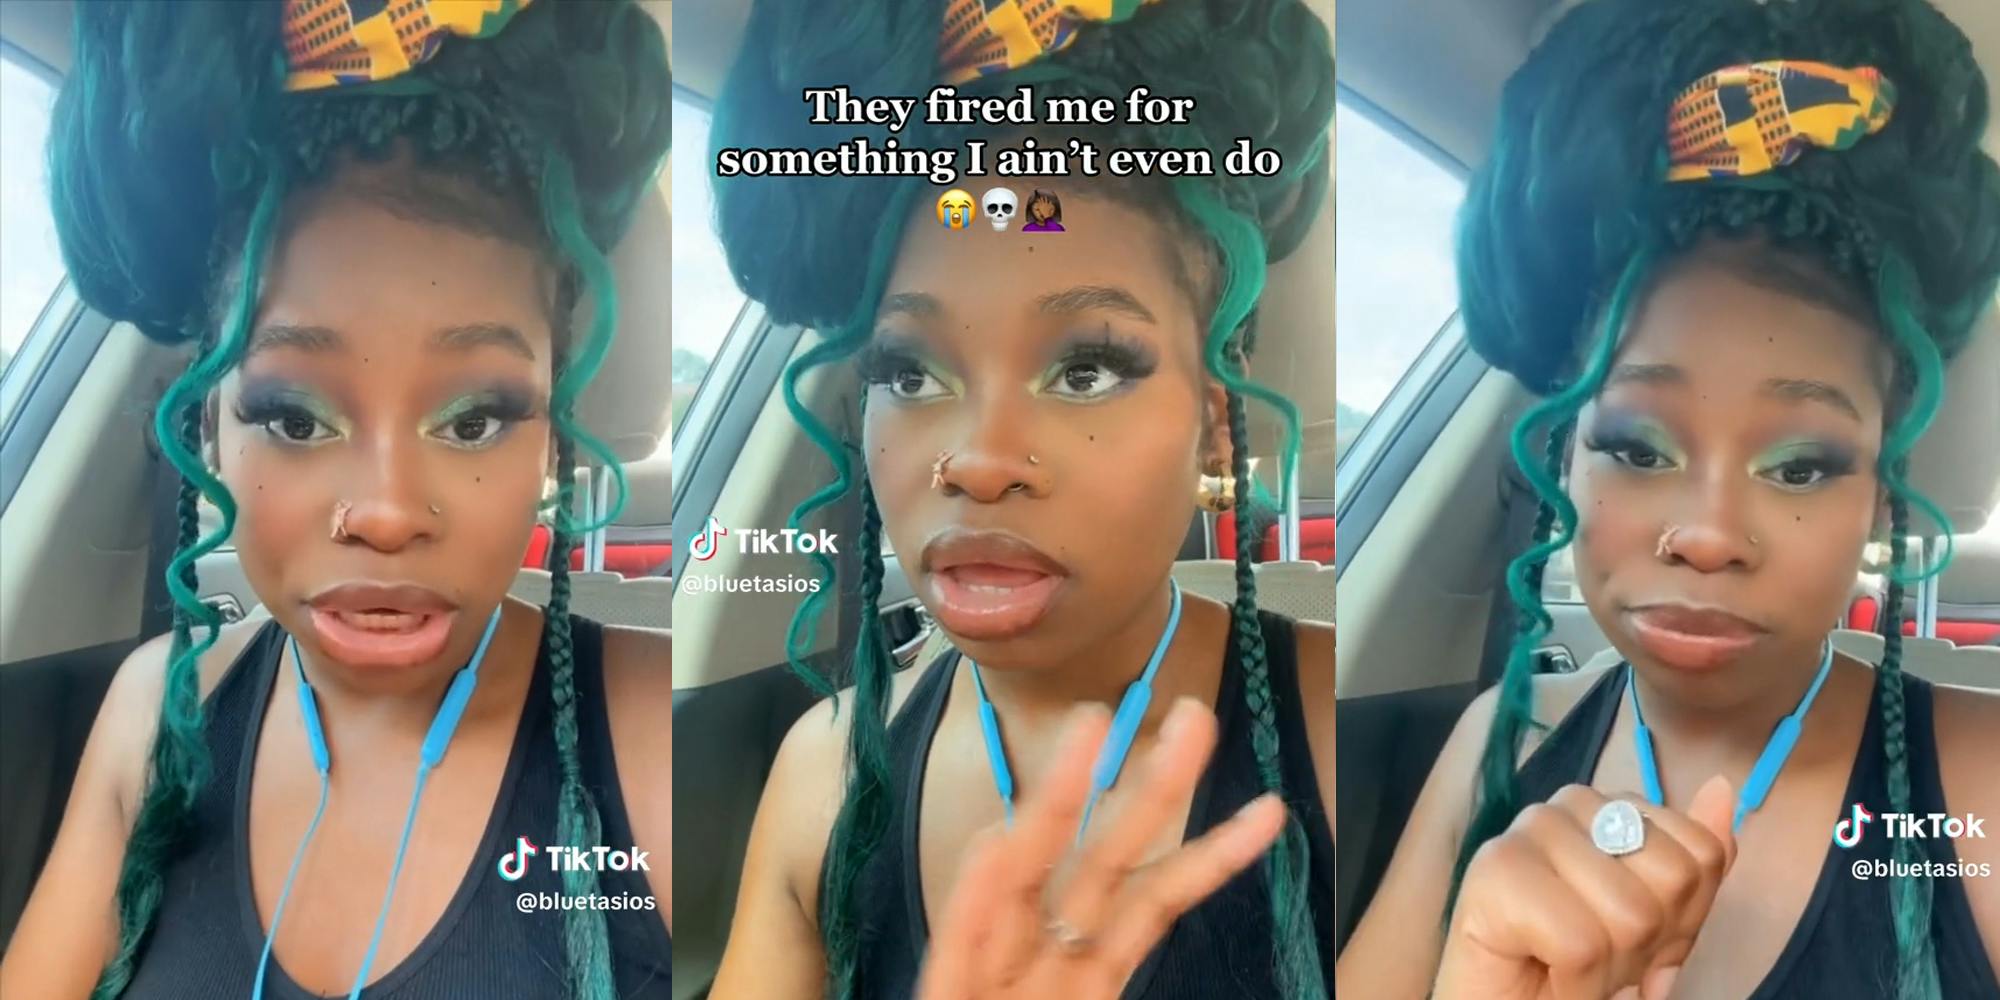 young woman in car with caption "They fired me for something I ain't even do"